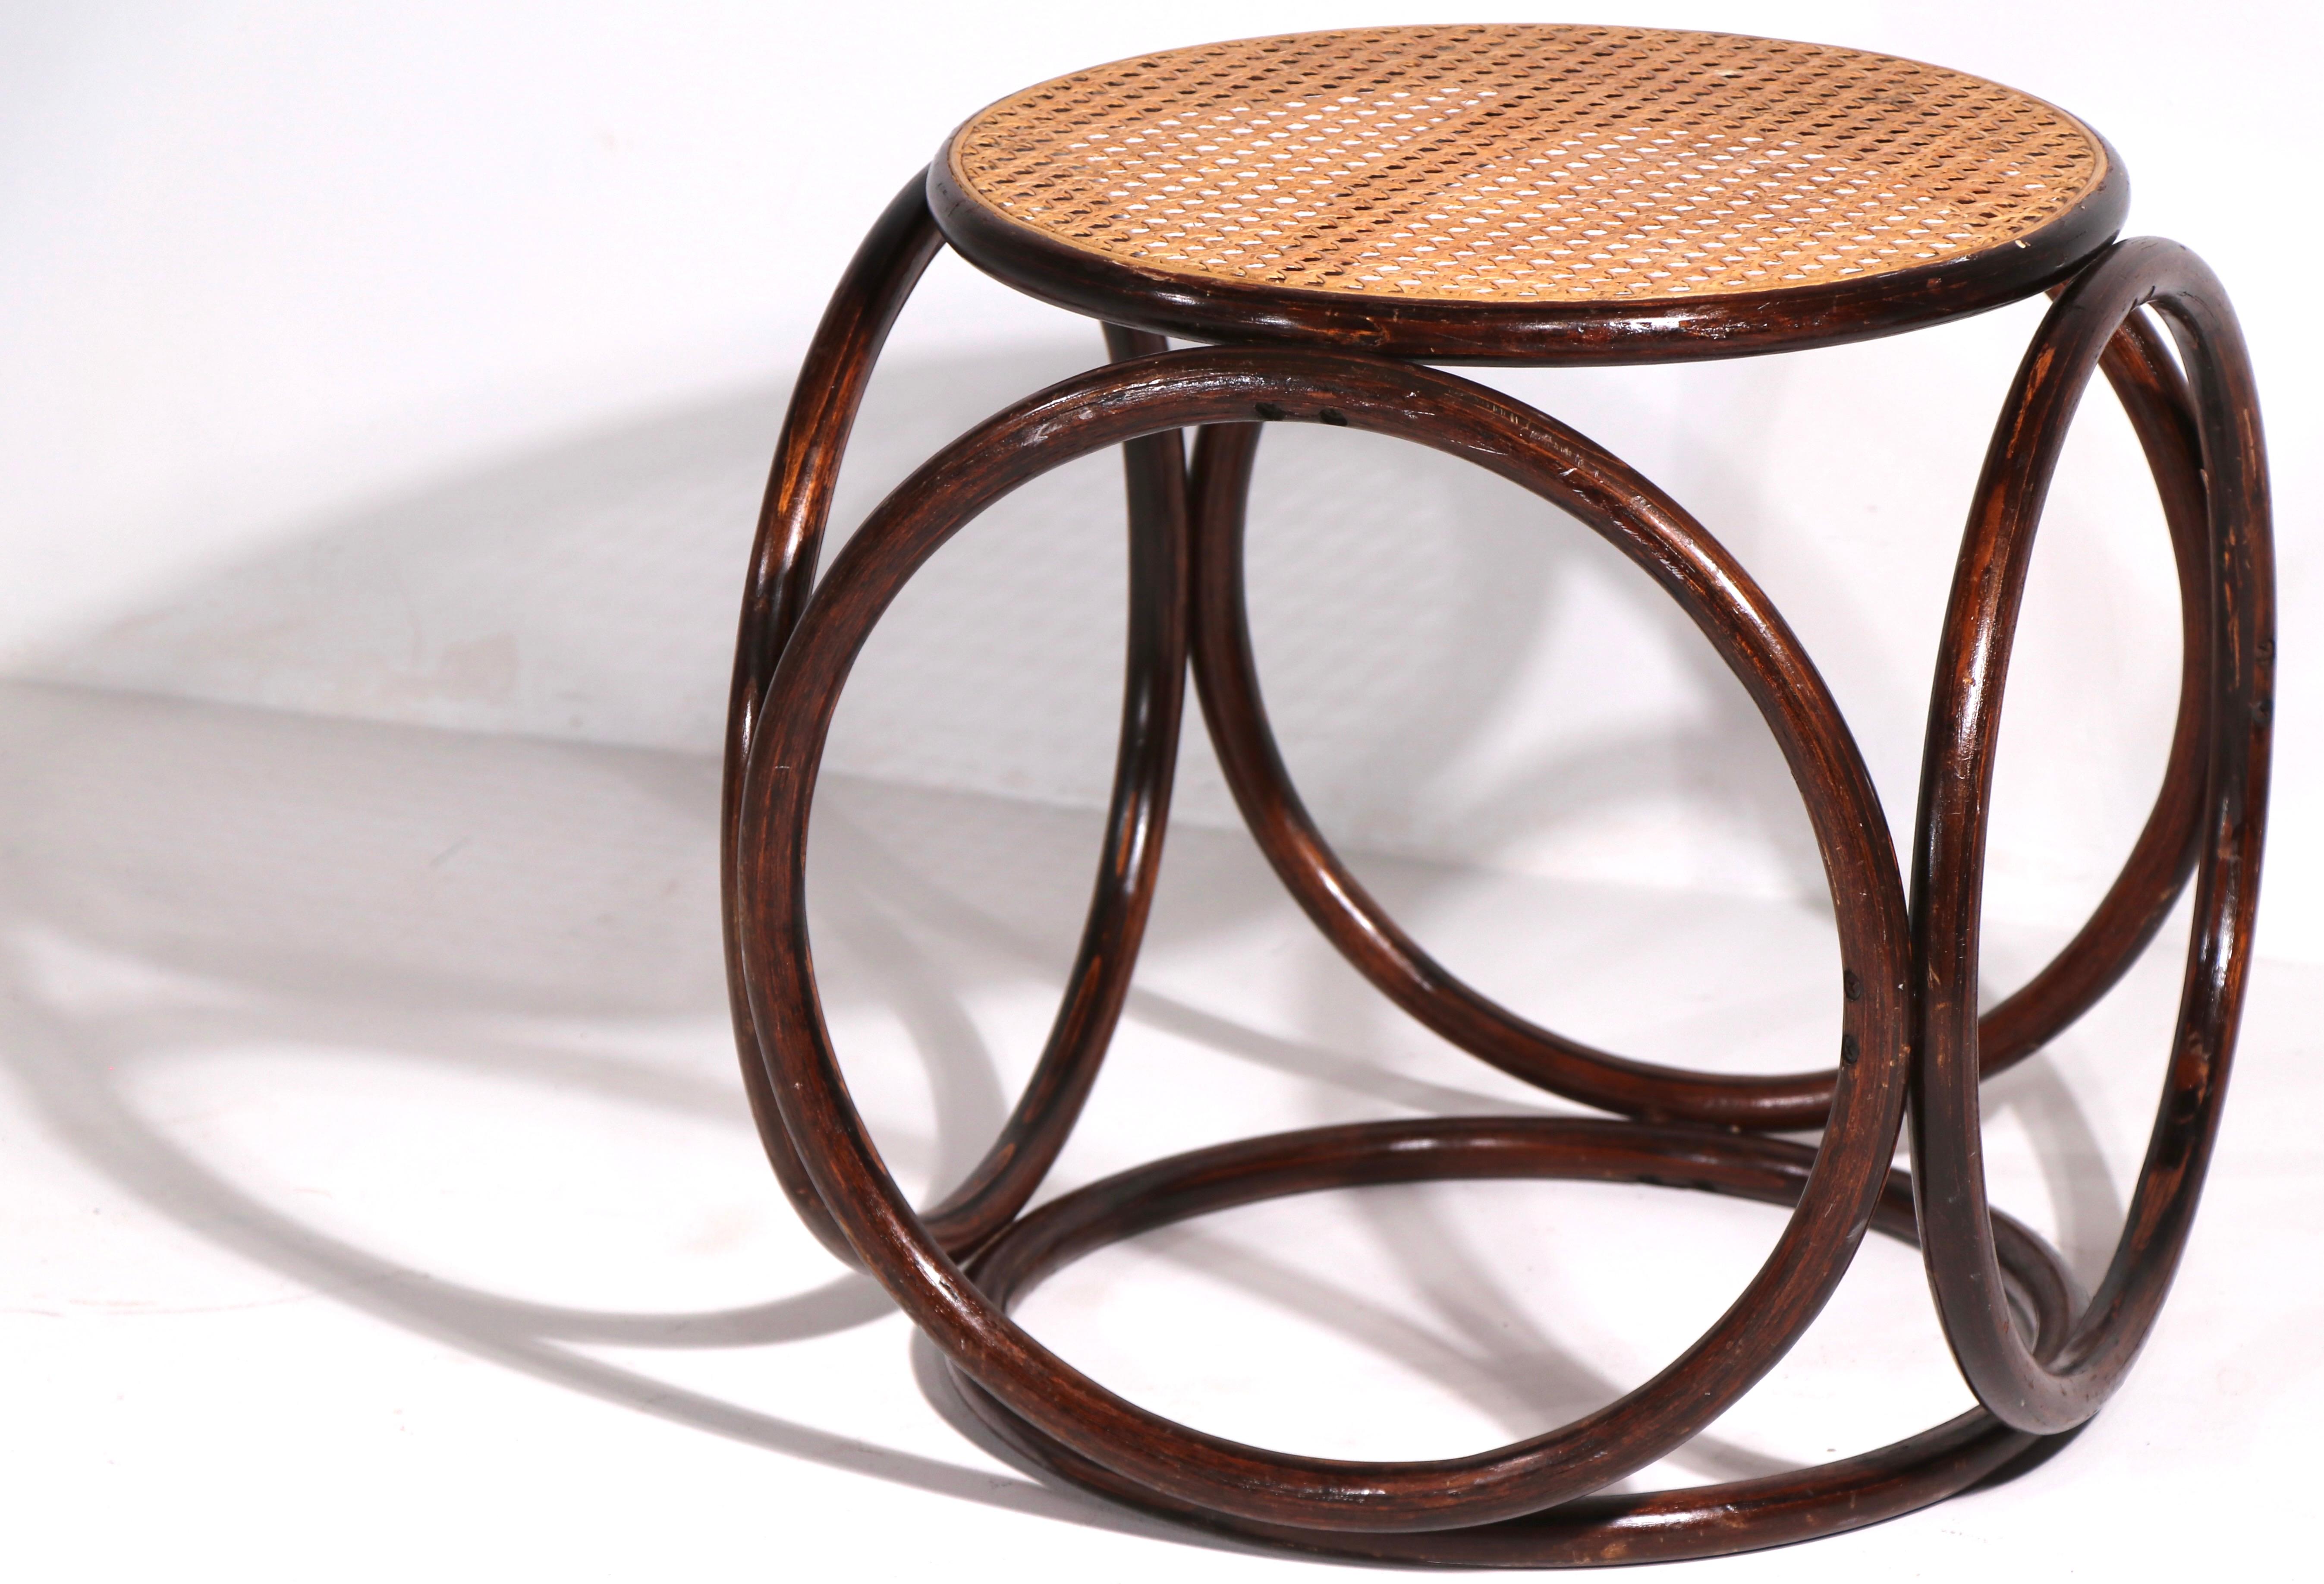 Vienna Secession Circular Thonet Ottoman Stool of Bentwood and Cane